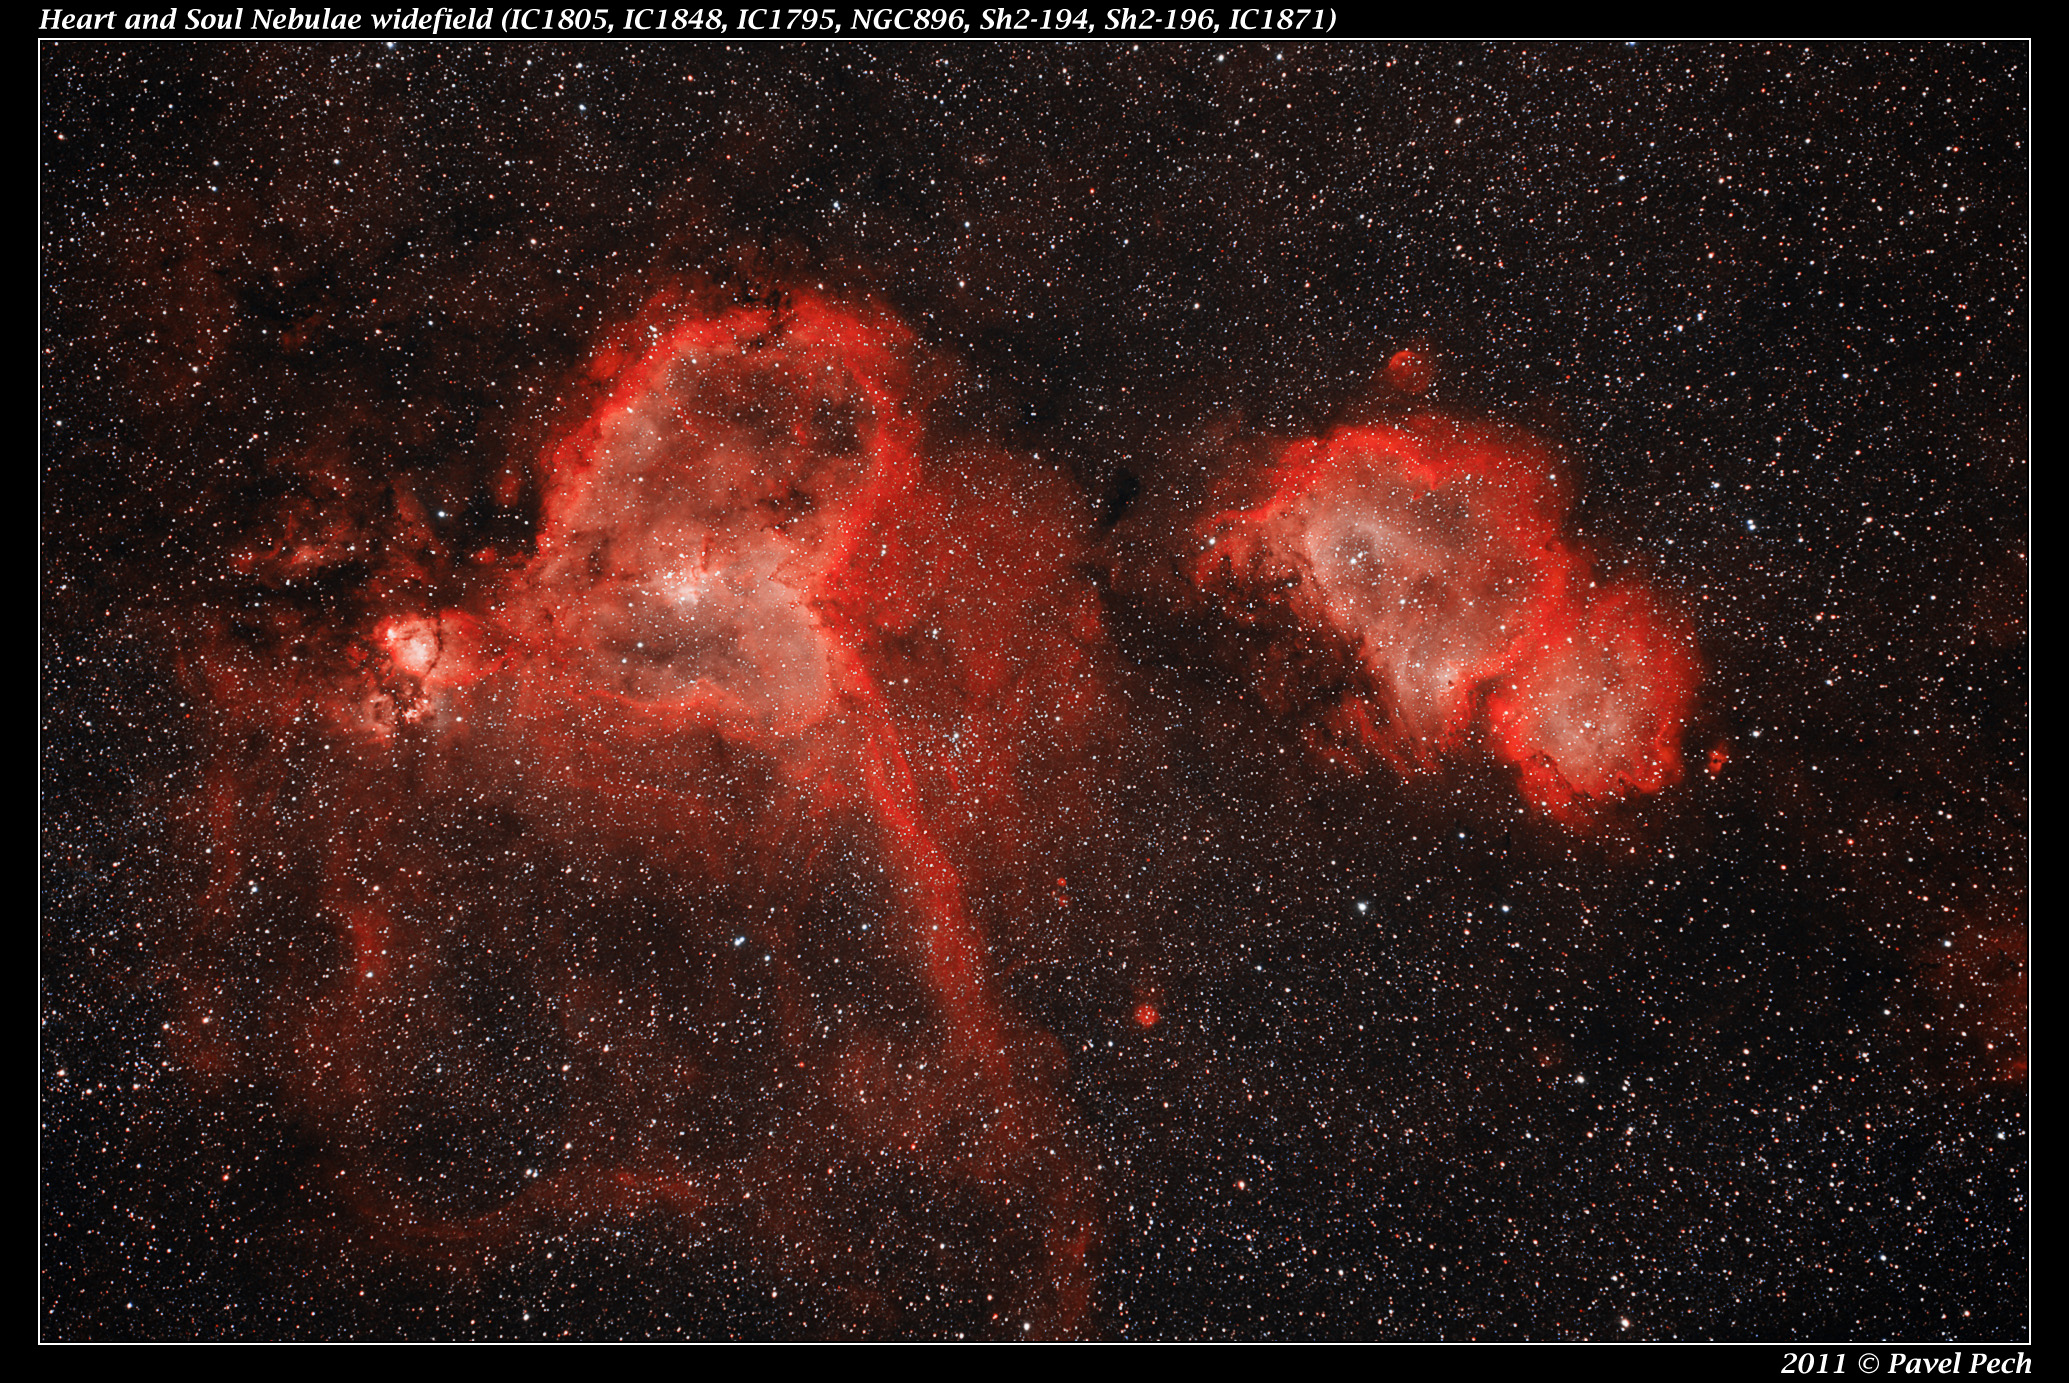 Heart and Soul Nebulae (IC1805, IC1848) bicolor